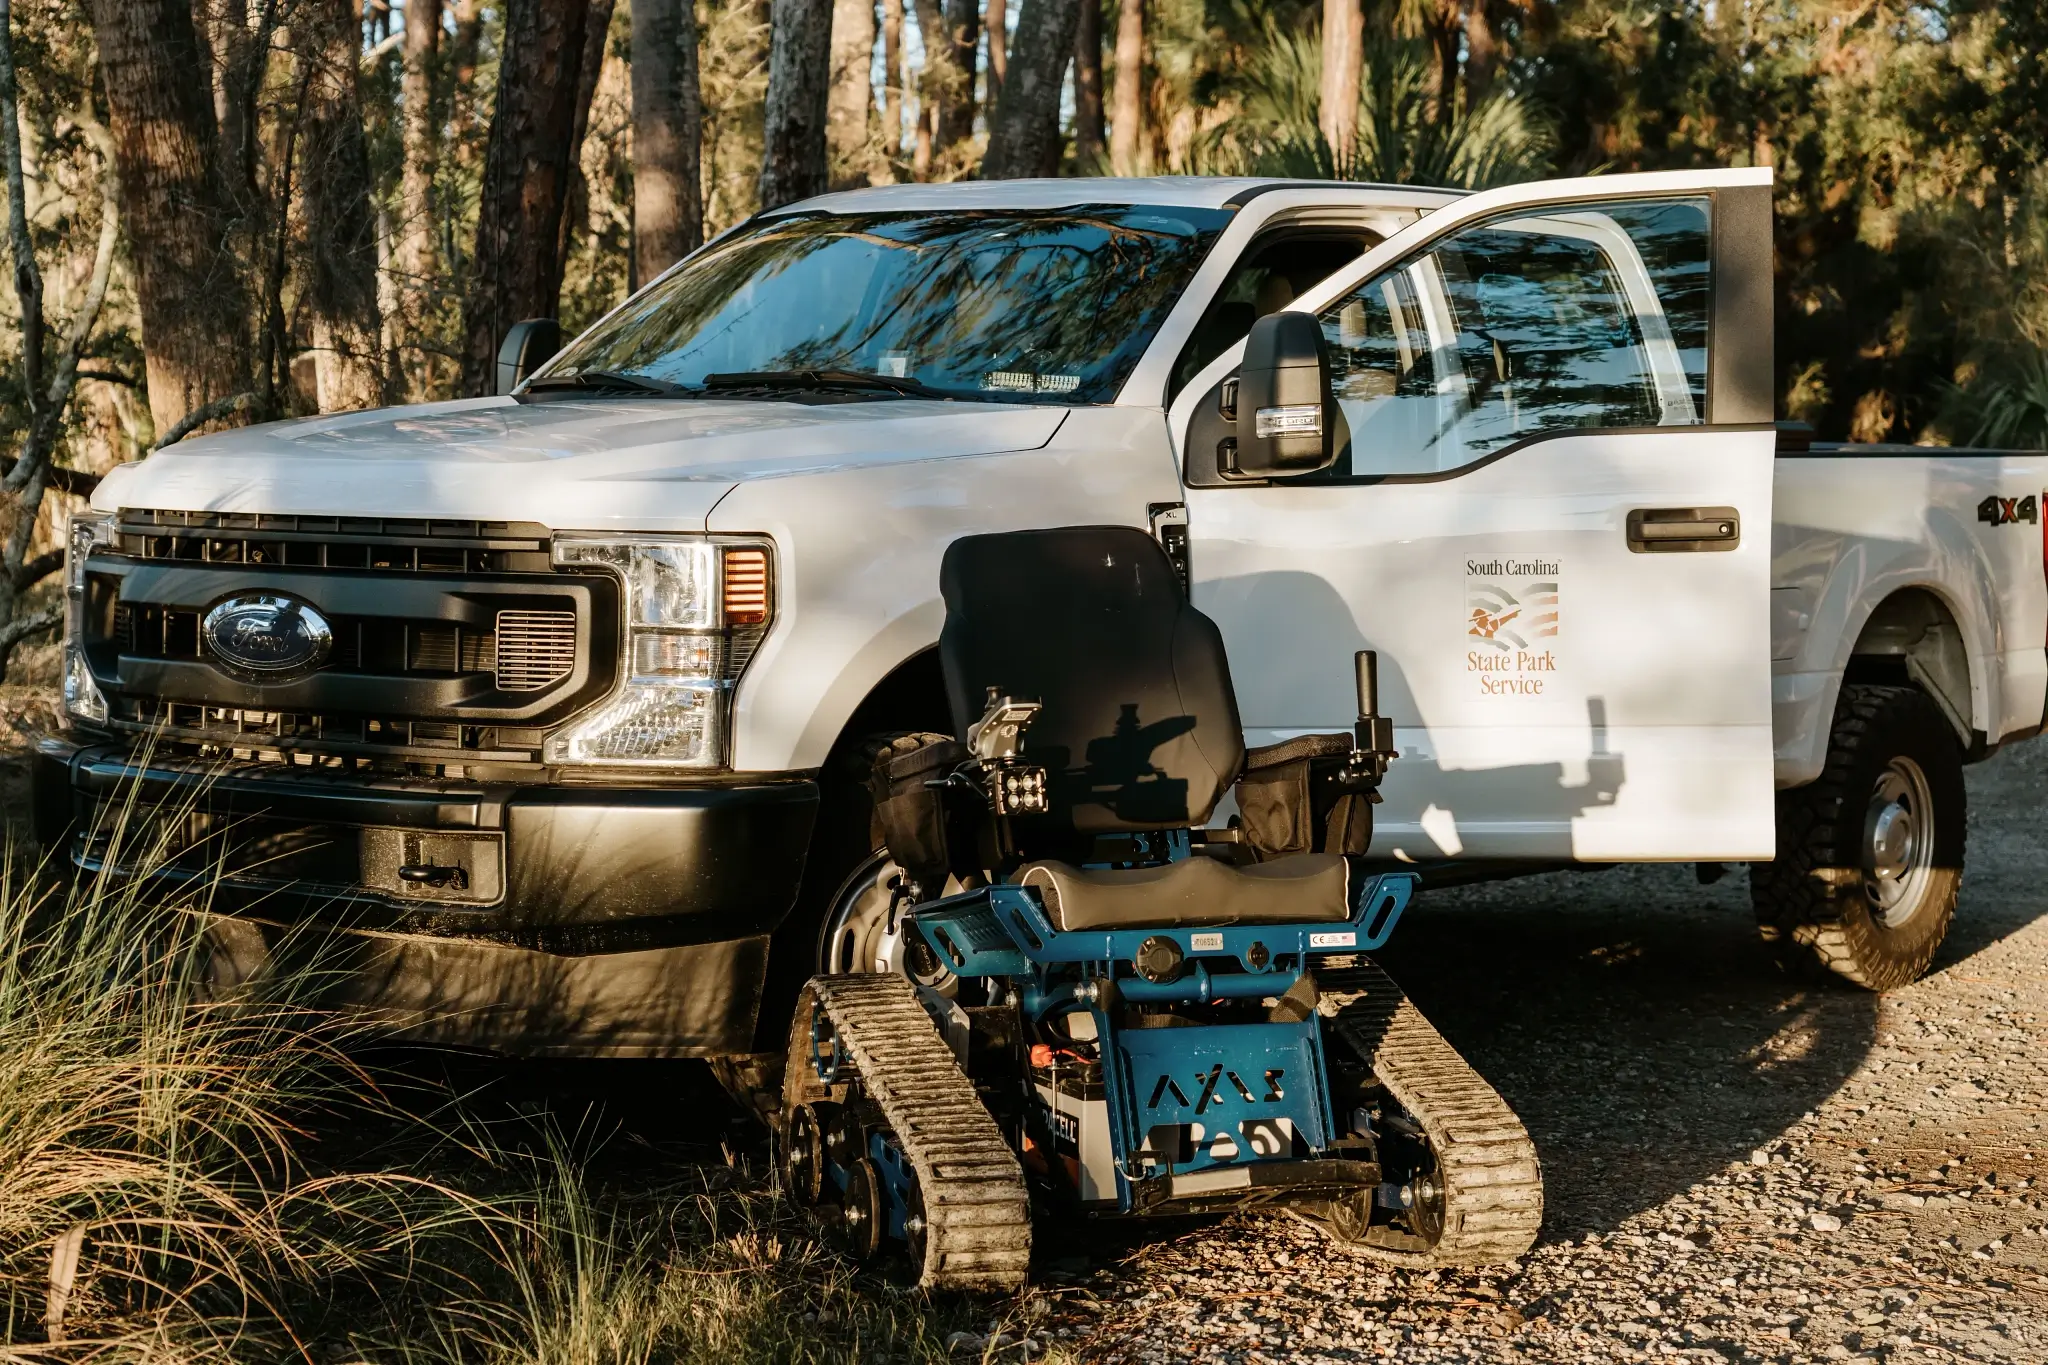 The Action Trackchair AXIS posed with a South Carolina State Parks Truck.